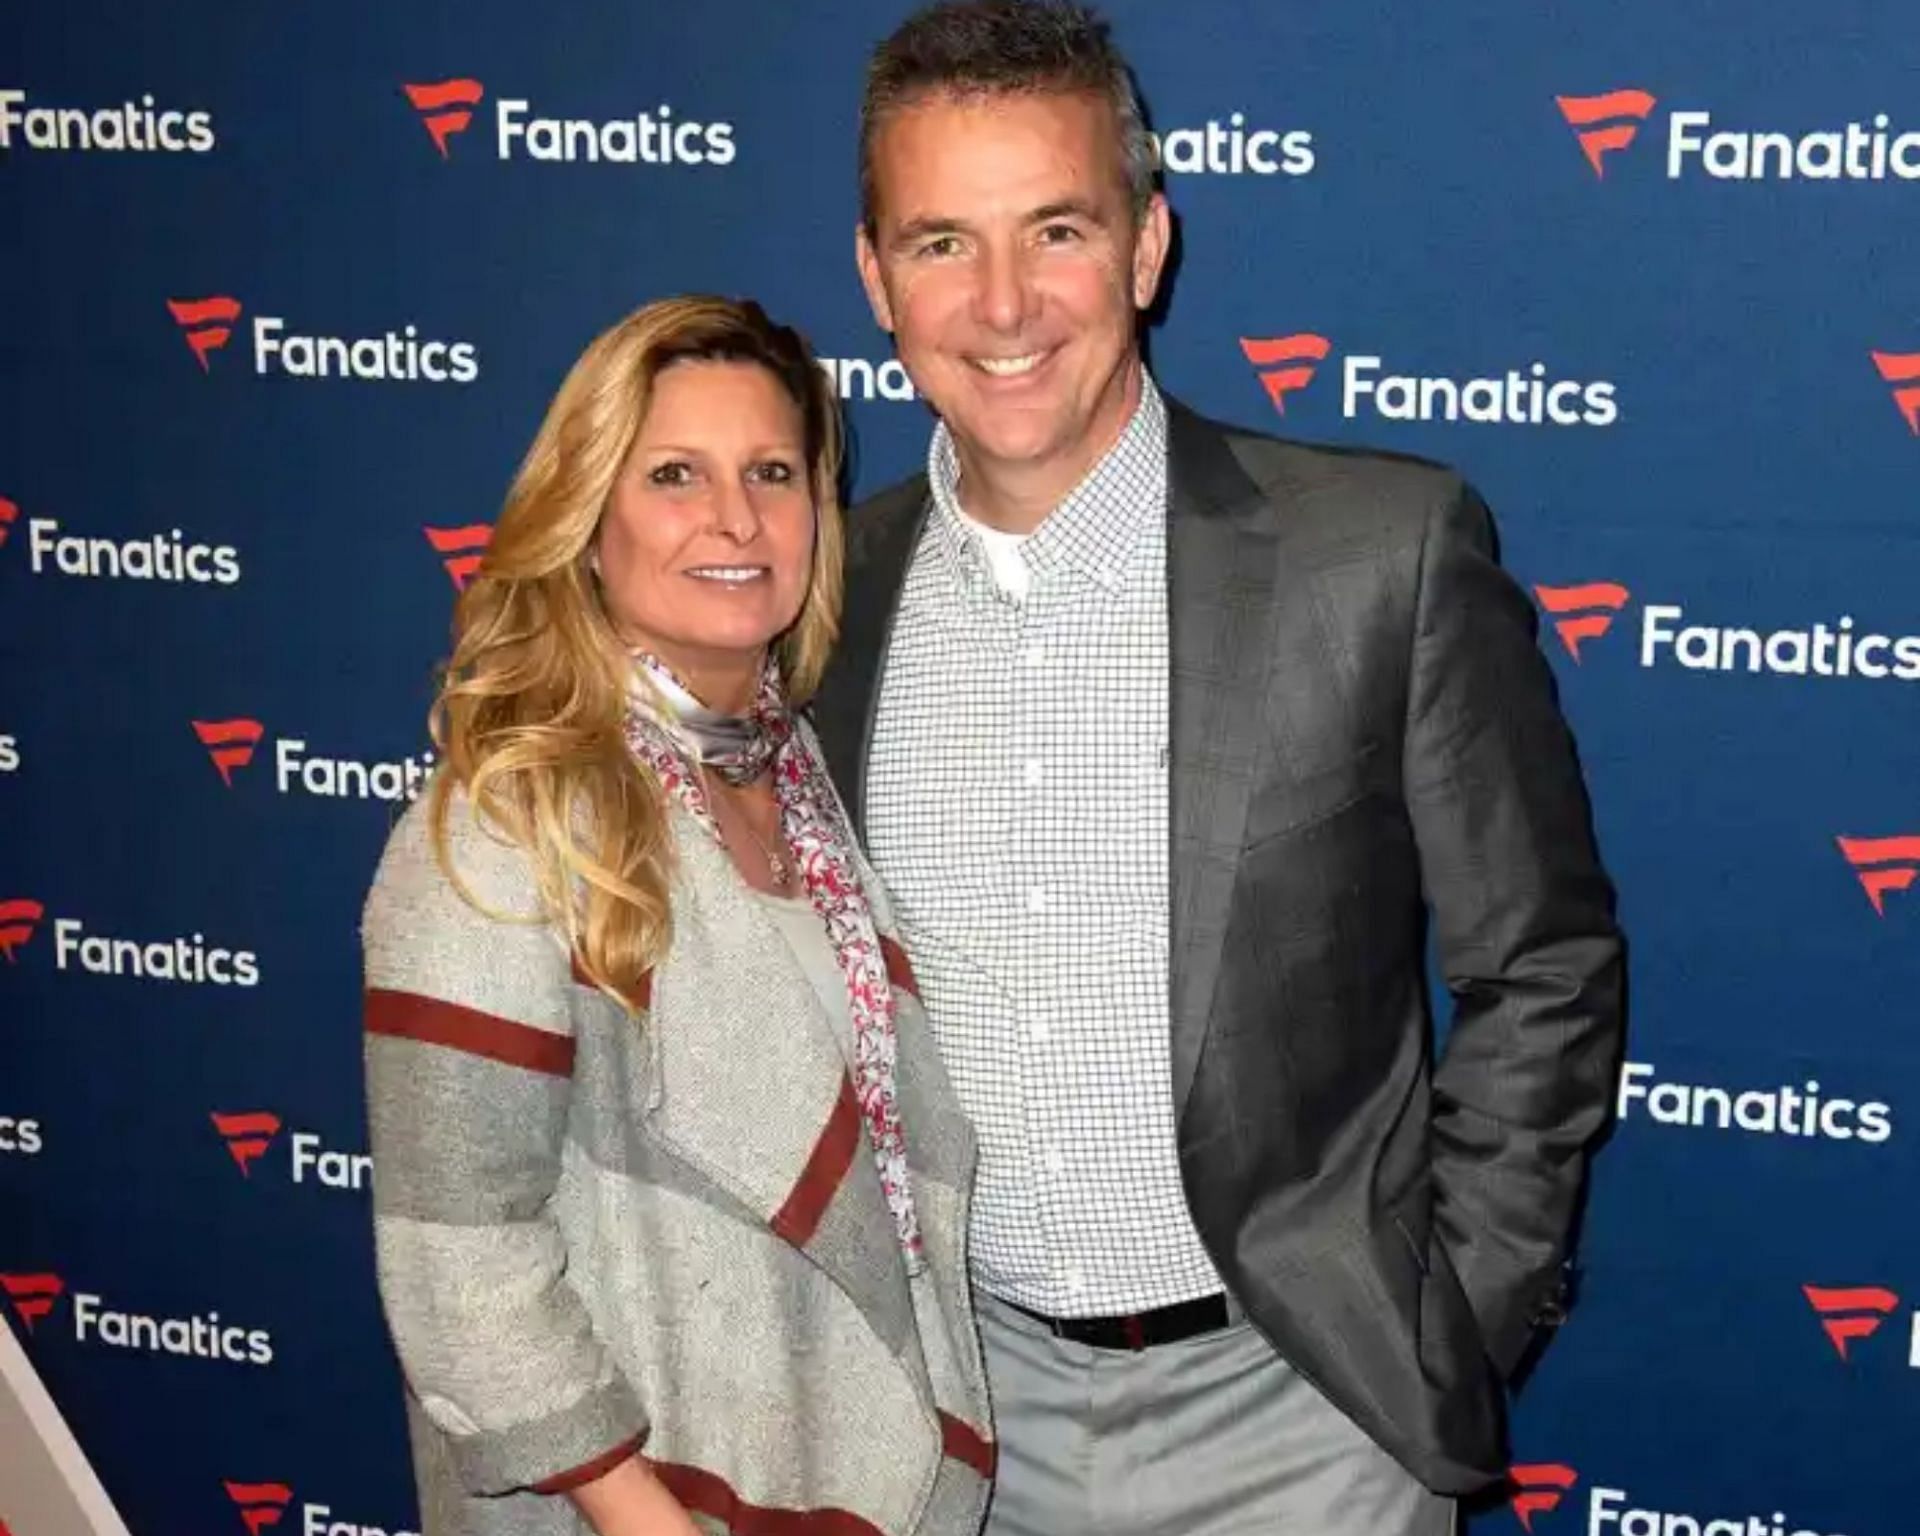 Urban Meyer and his wife Shelley Mather